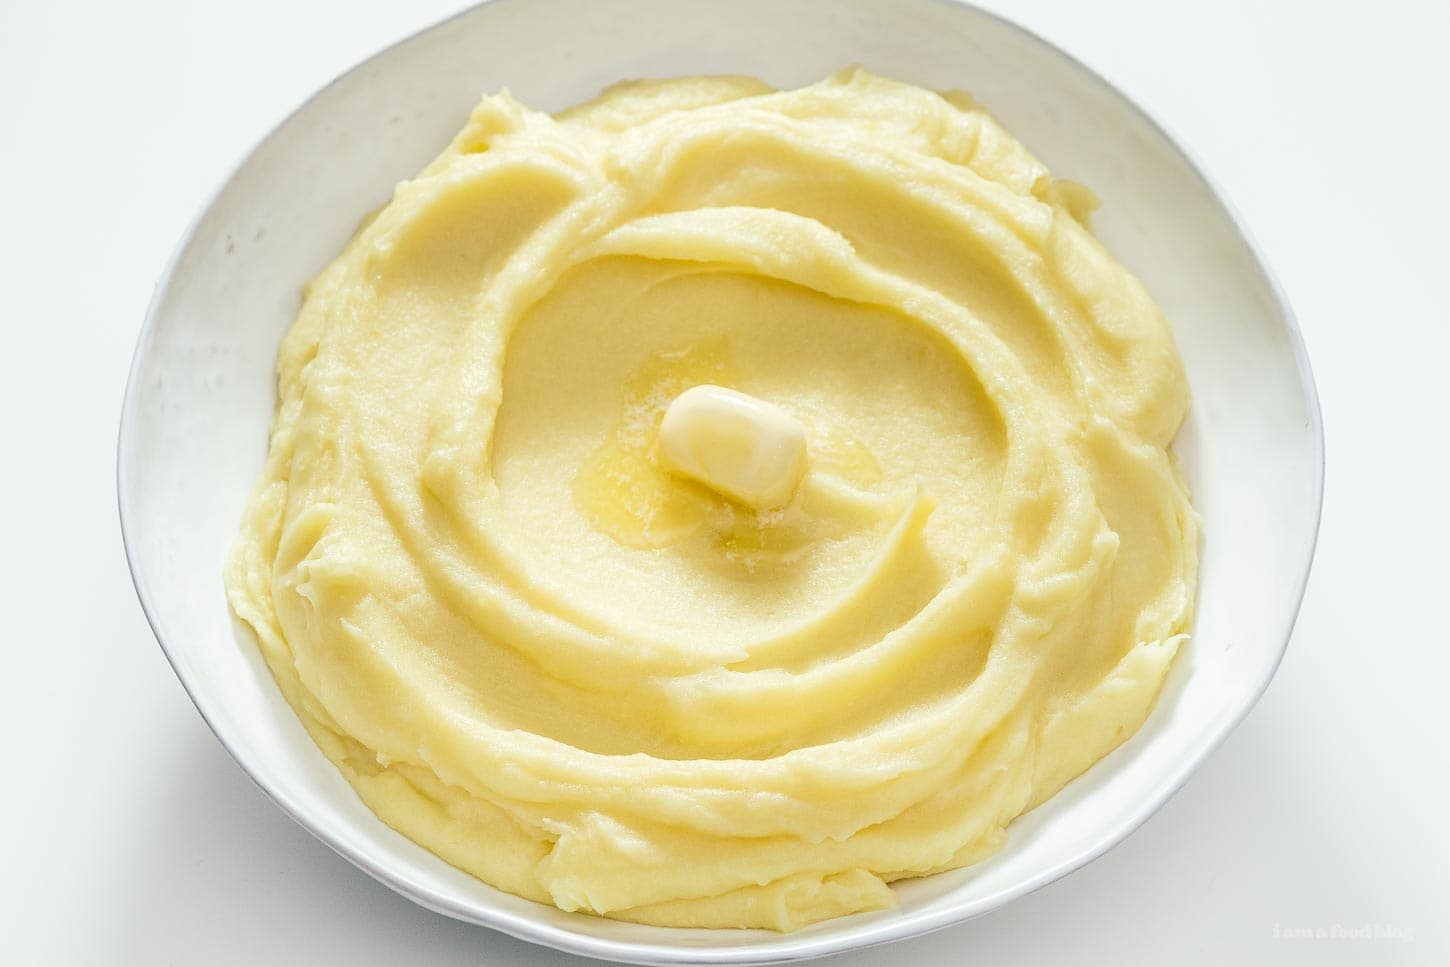 mashed potatoes with butter | www.iamafoodblog.com